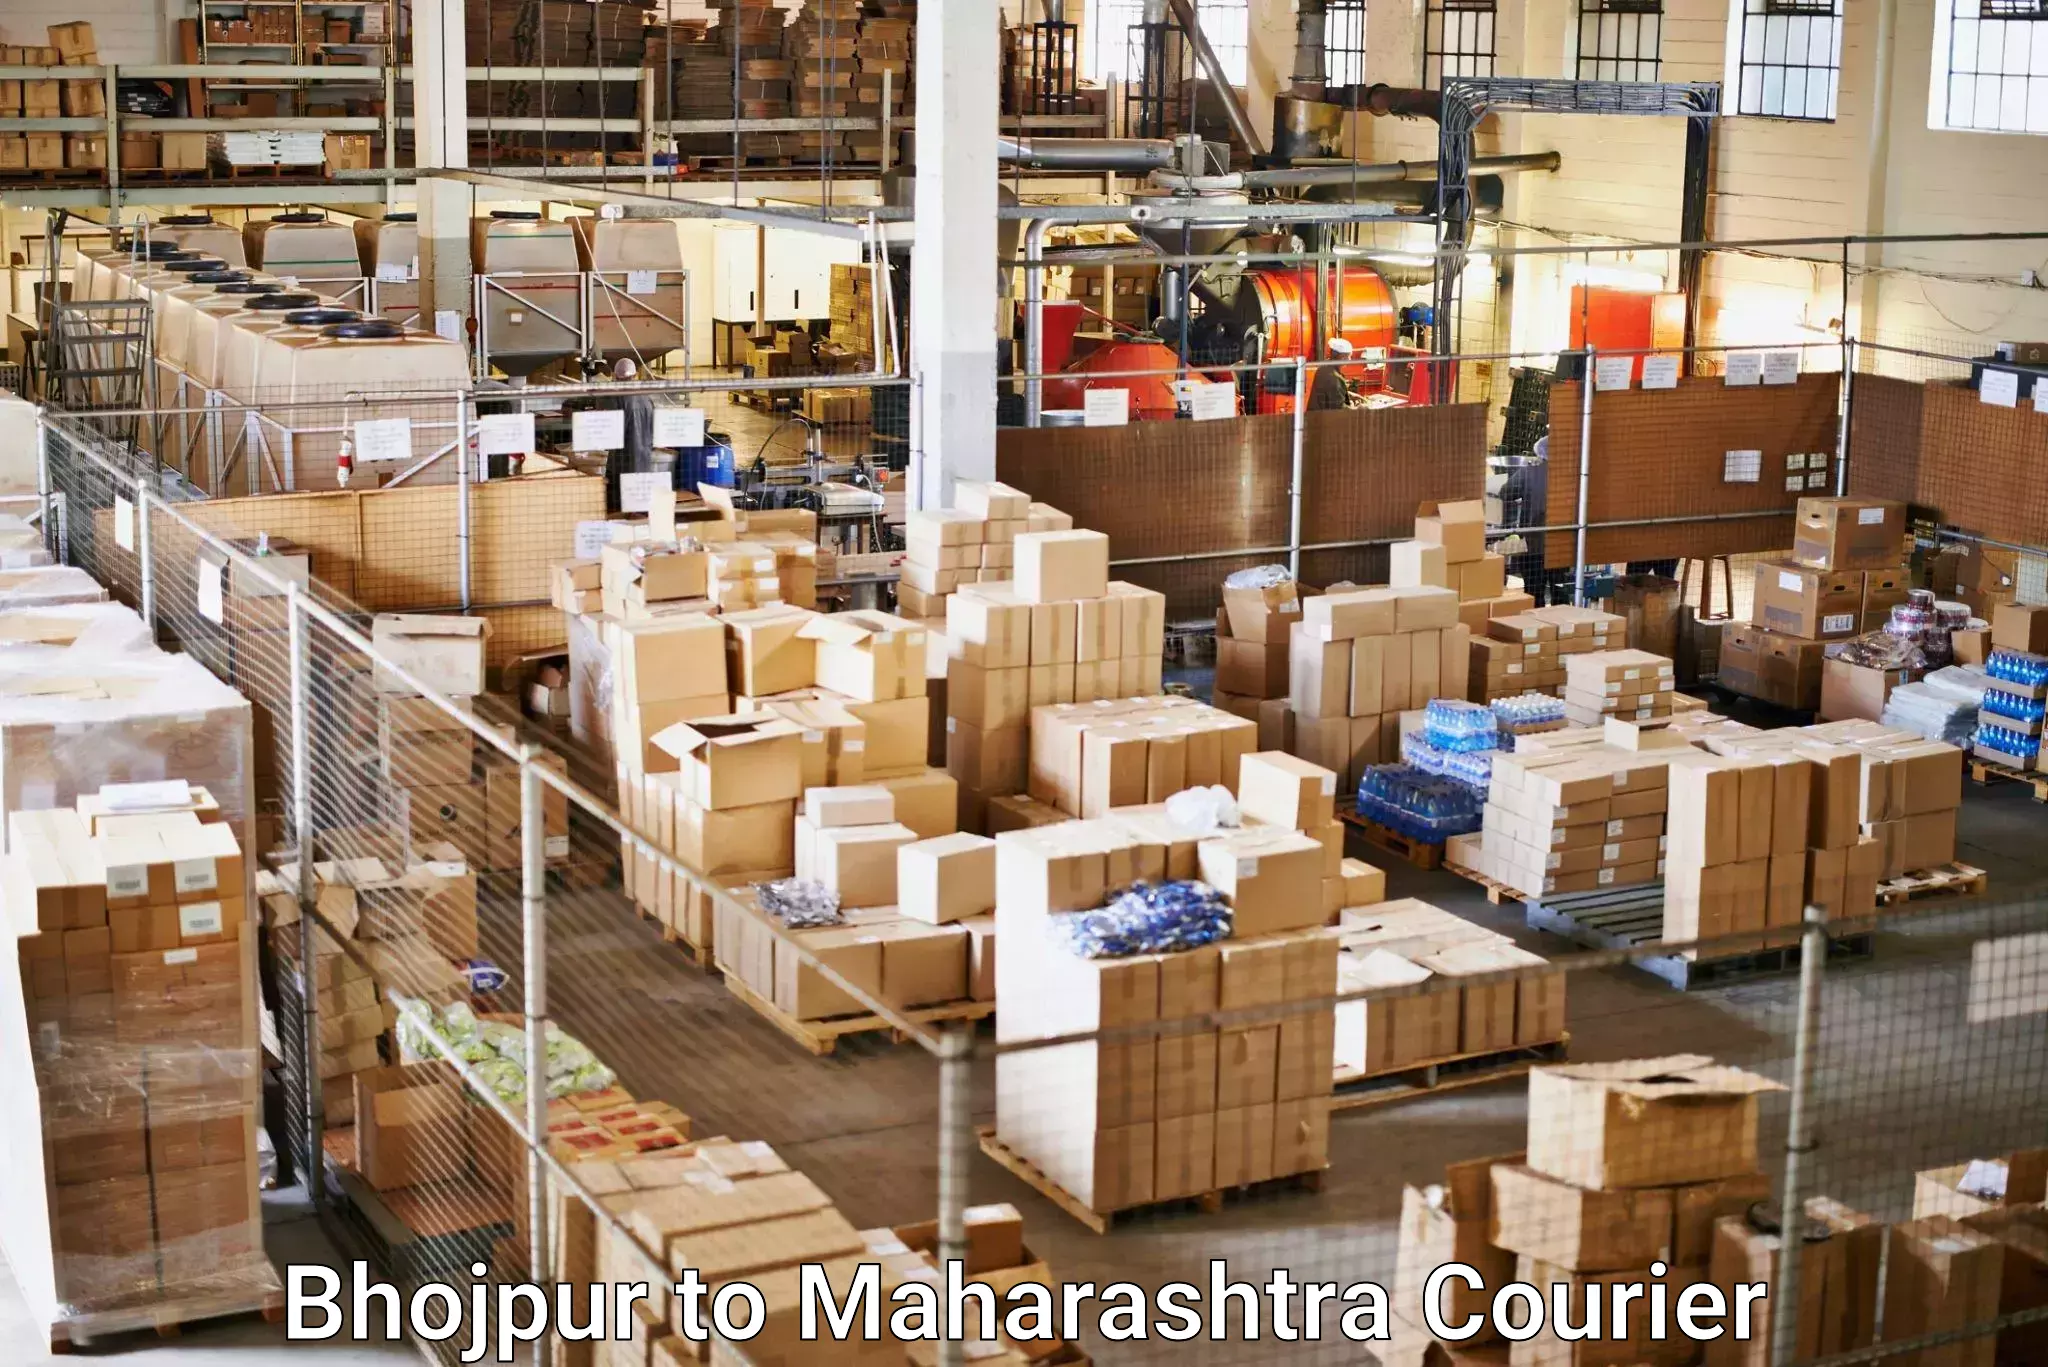 Global shipping networks Bhojpur to Shindkheda